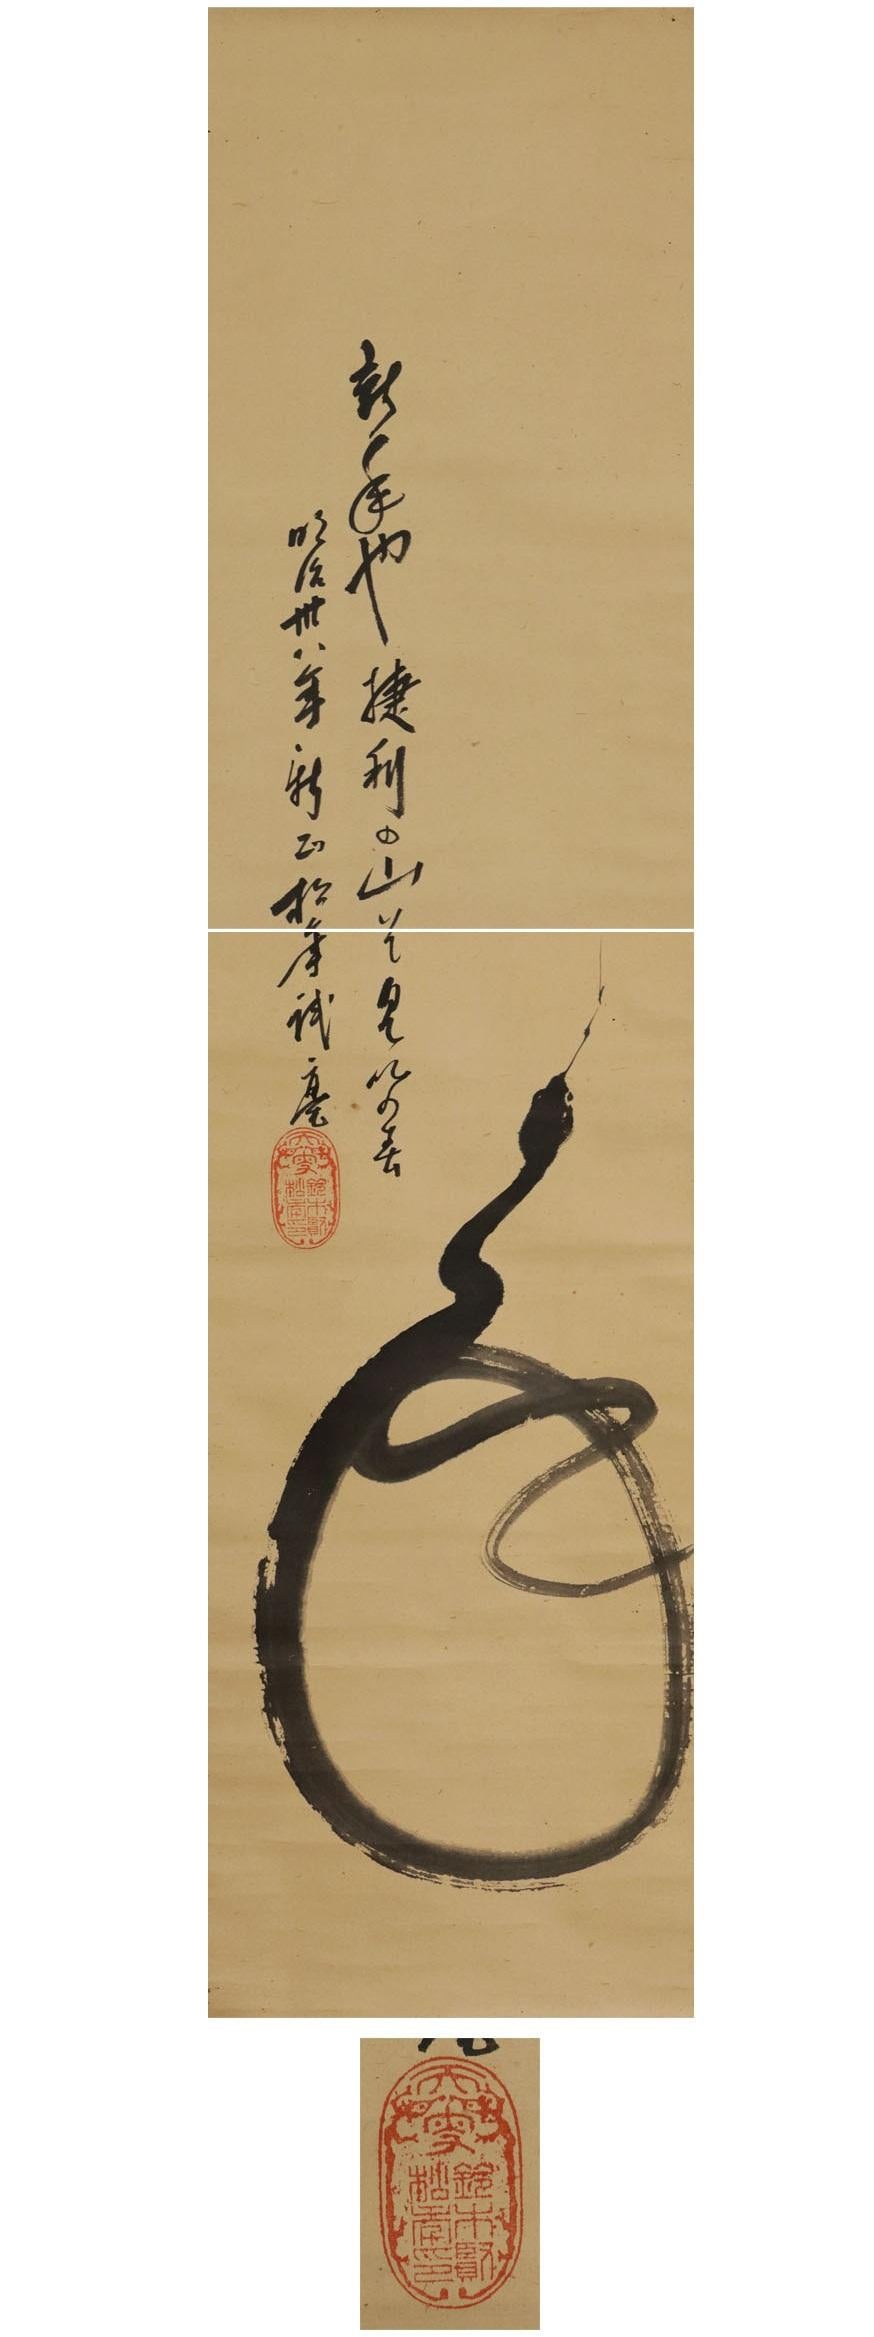 Product Description
This is a work drawn by Matsutoshi Suzuki on New Year's Day, 1903, as you can see.
The figure of the zodiac ``Snake'' and a jewel are depicted, and a poem of praise is attached to the top.

《Suzuki Shoutoshi》
Separate issue is a